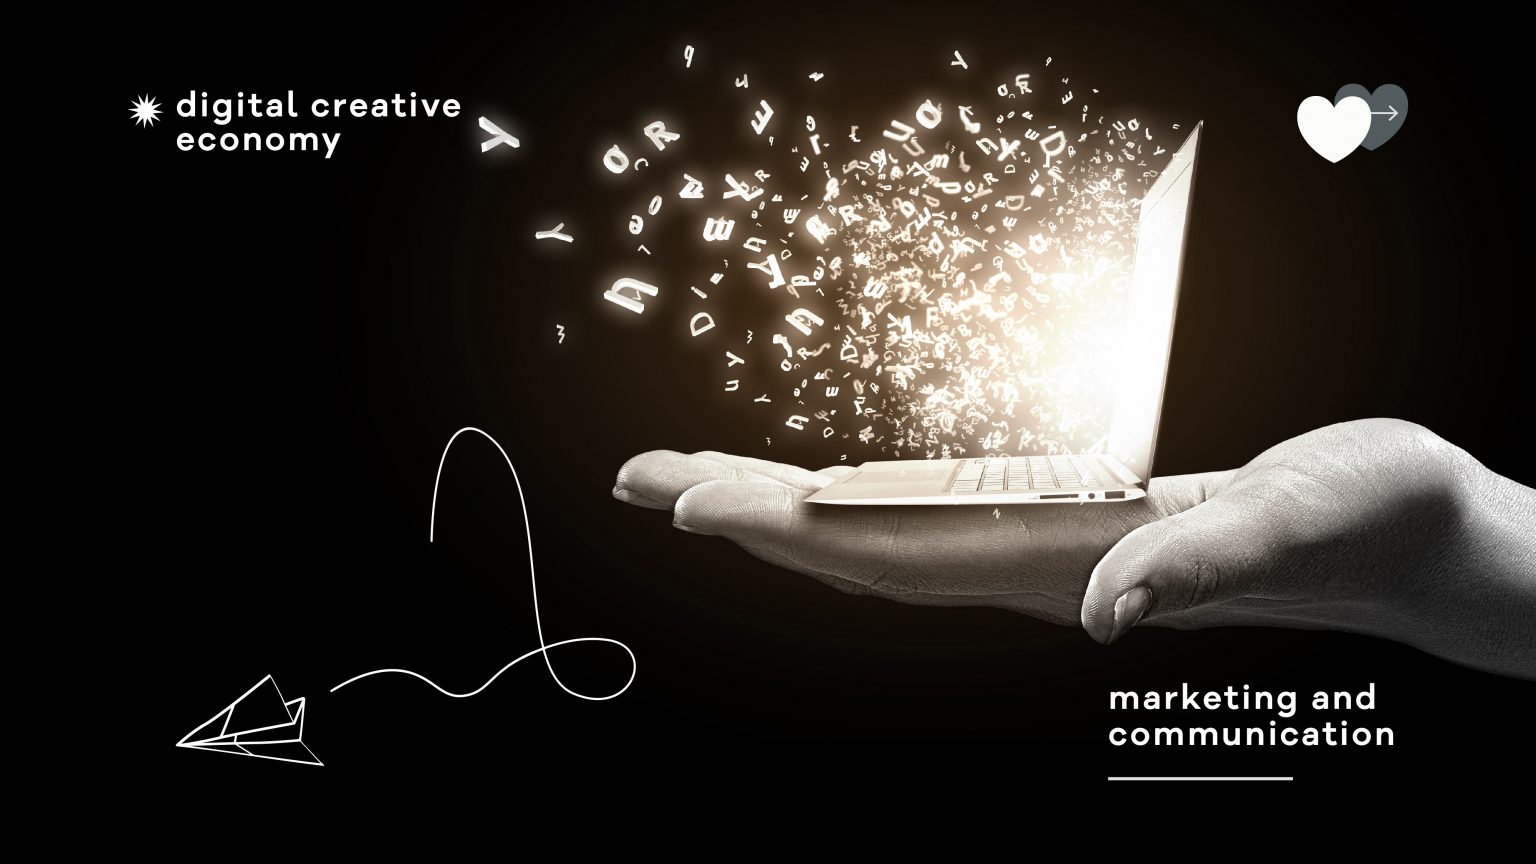 the digital creative economy and agencies as professional content providers